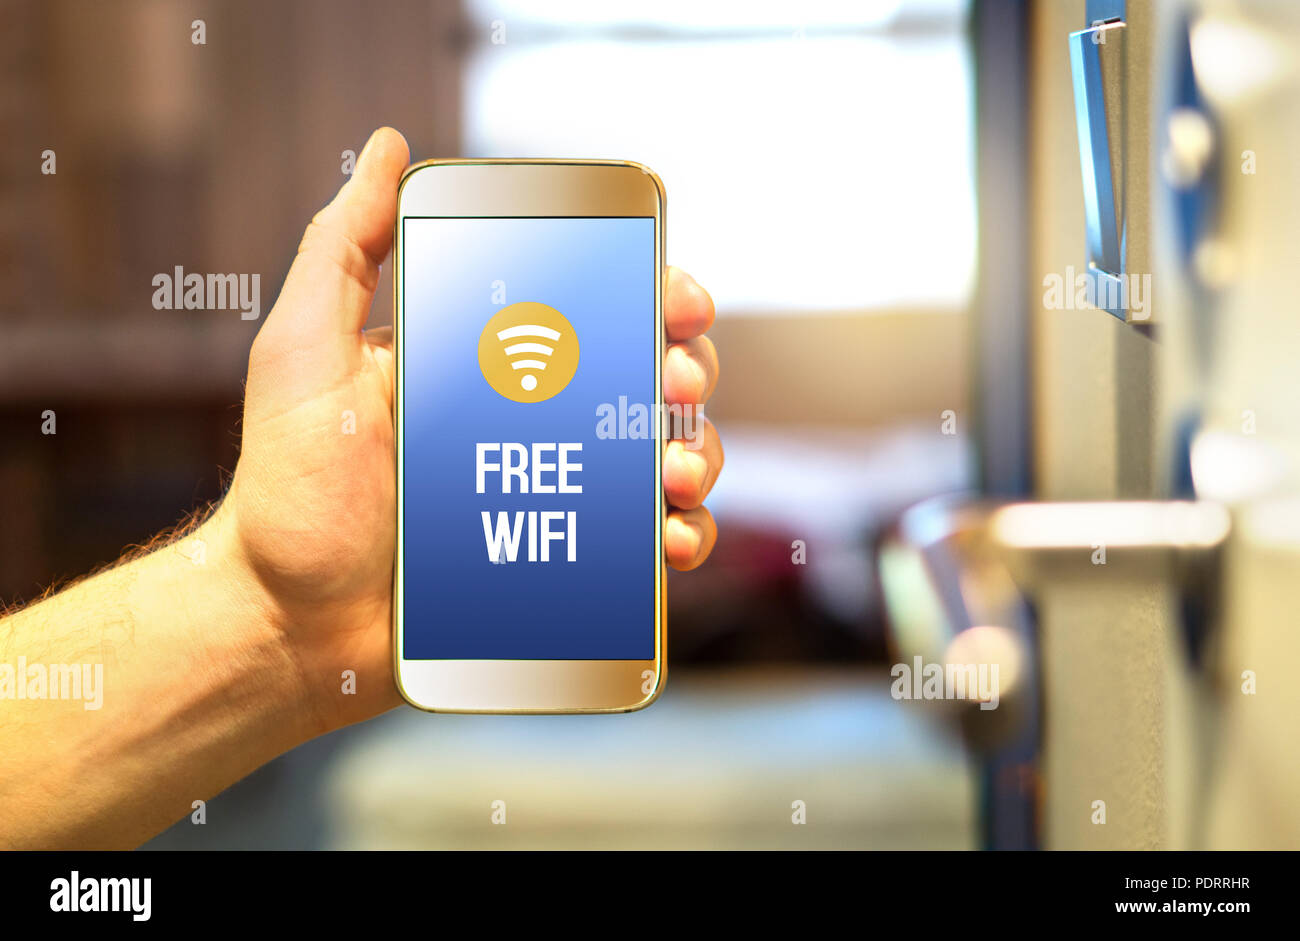 Free hotel wifi on smartphone in hotel room. Public internet access and connection available for customers, visitors and tourists. Hand holding phone. Stock Photo